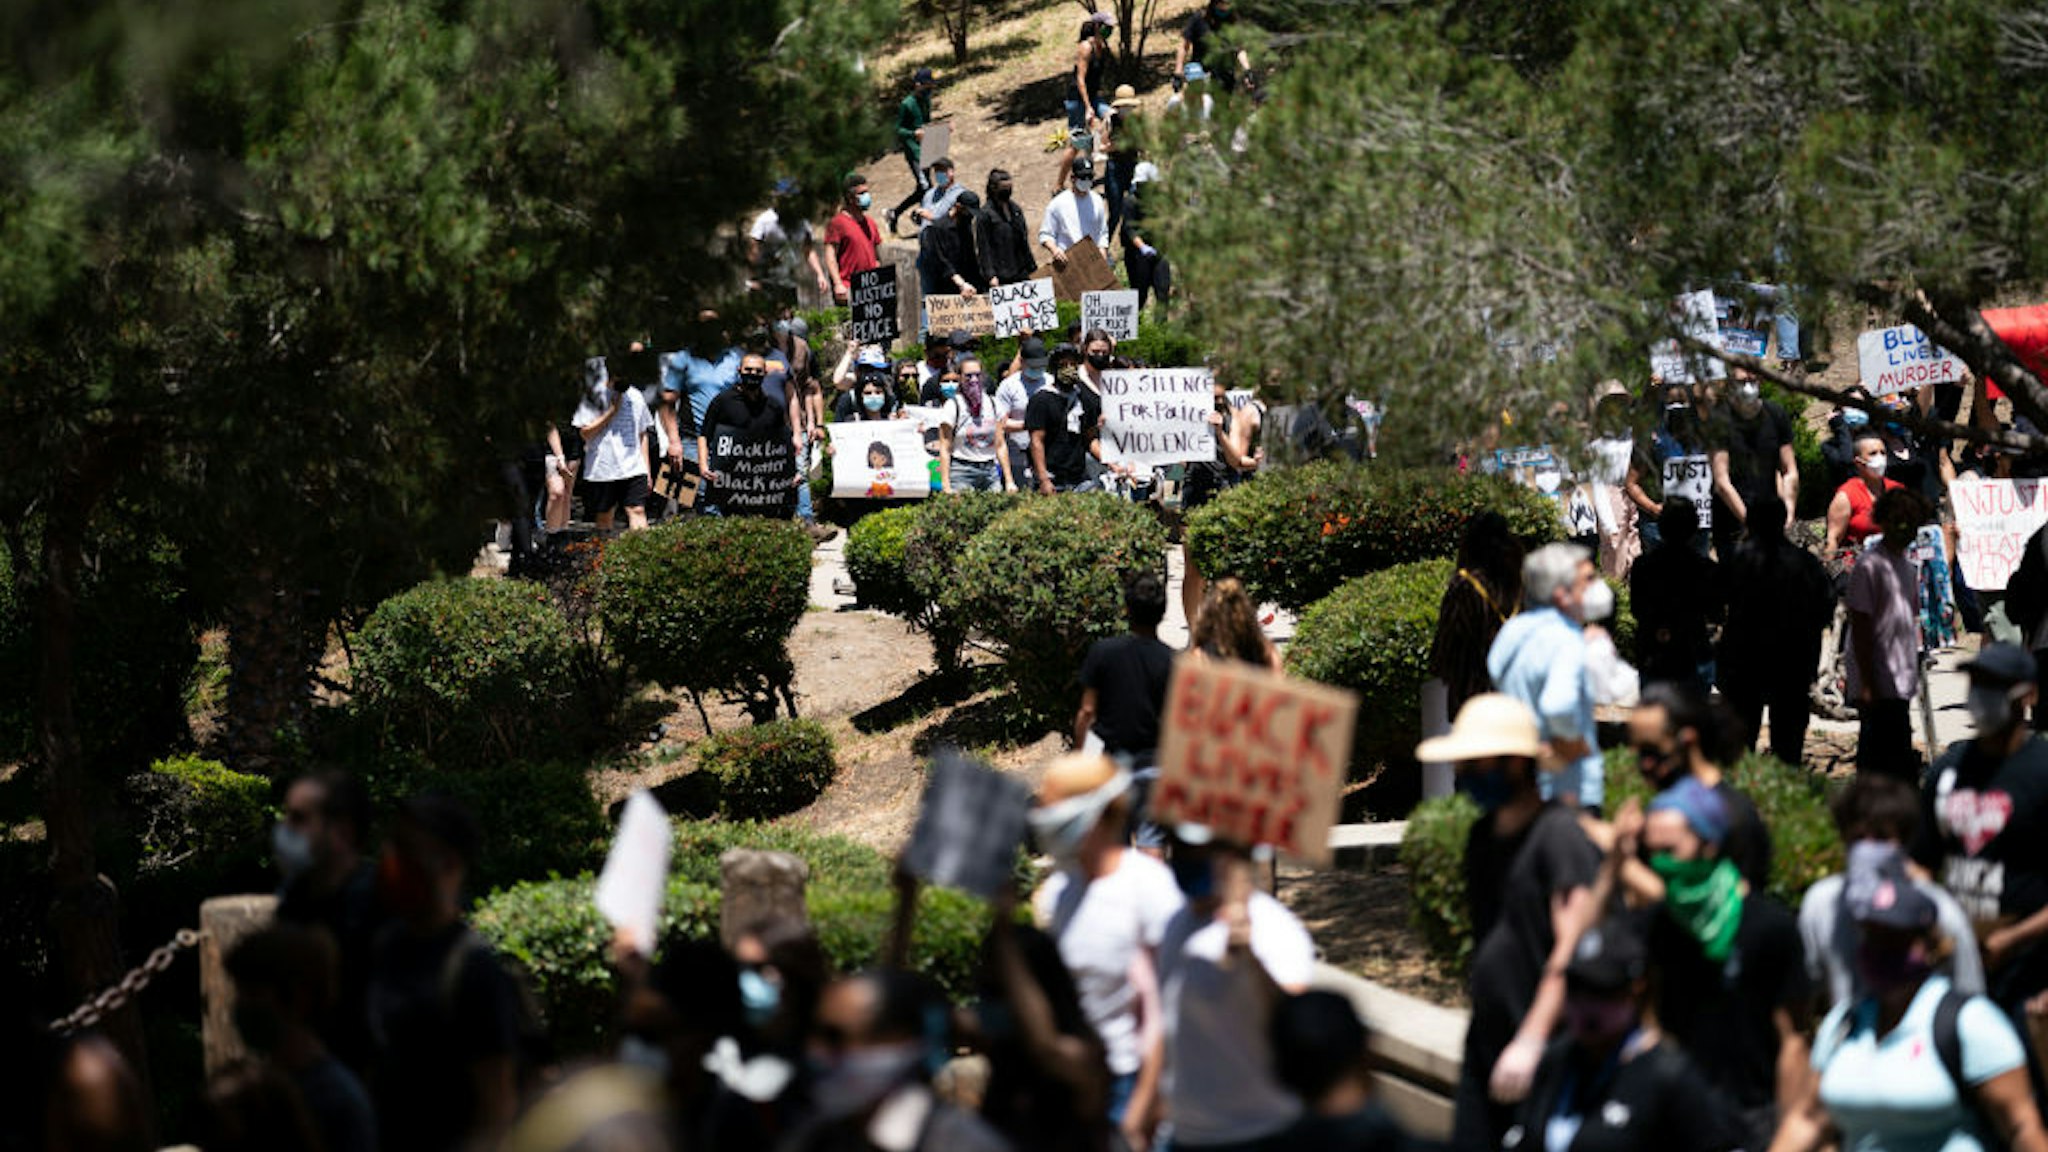 People at a gathering setup by groups Black Lives Matter Los Angeles and Build Power that started at Pan Pacific Park and went through the Fairfax District on Saturday, May 30, 2020 in Los Angeles, CA.